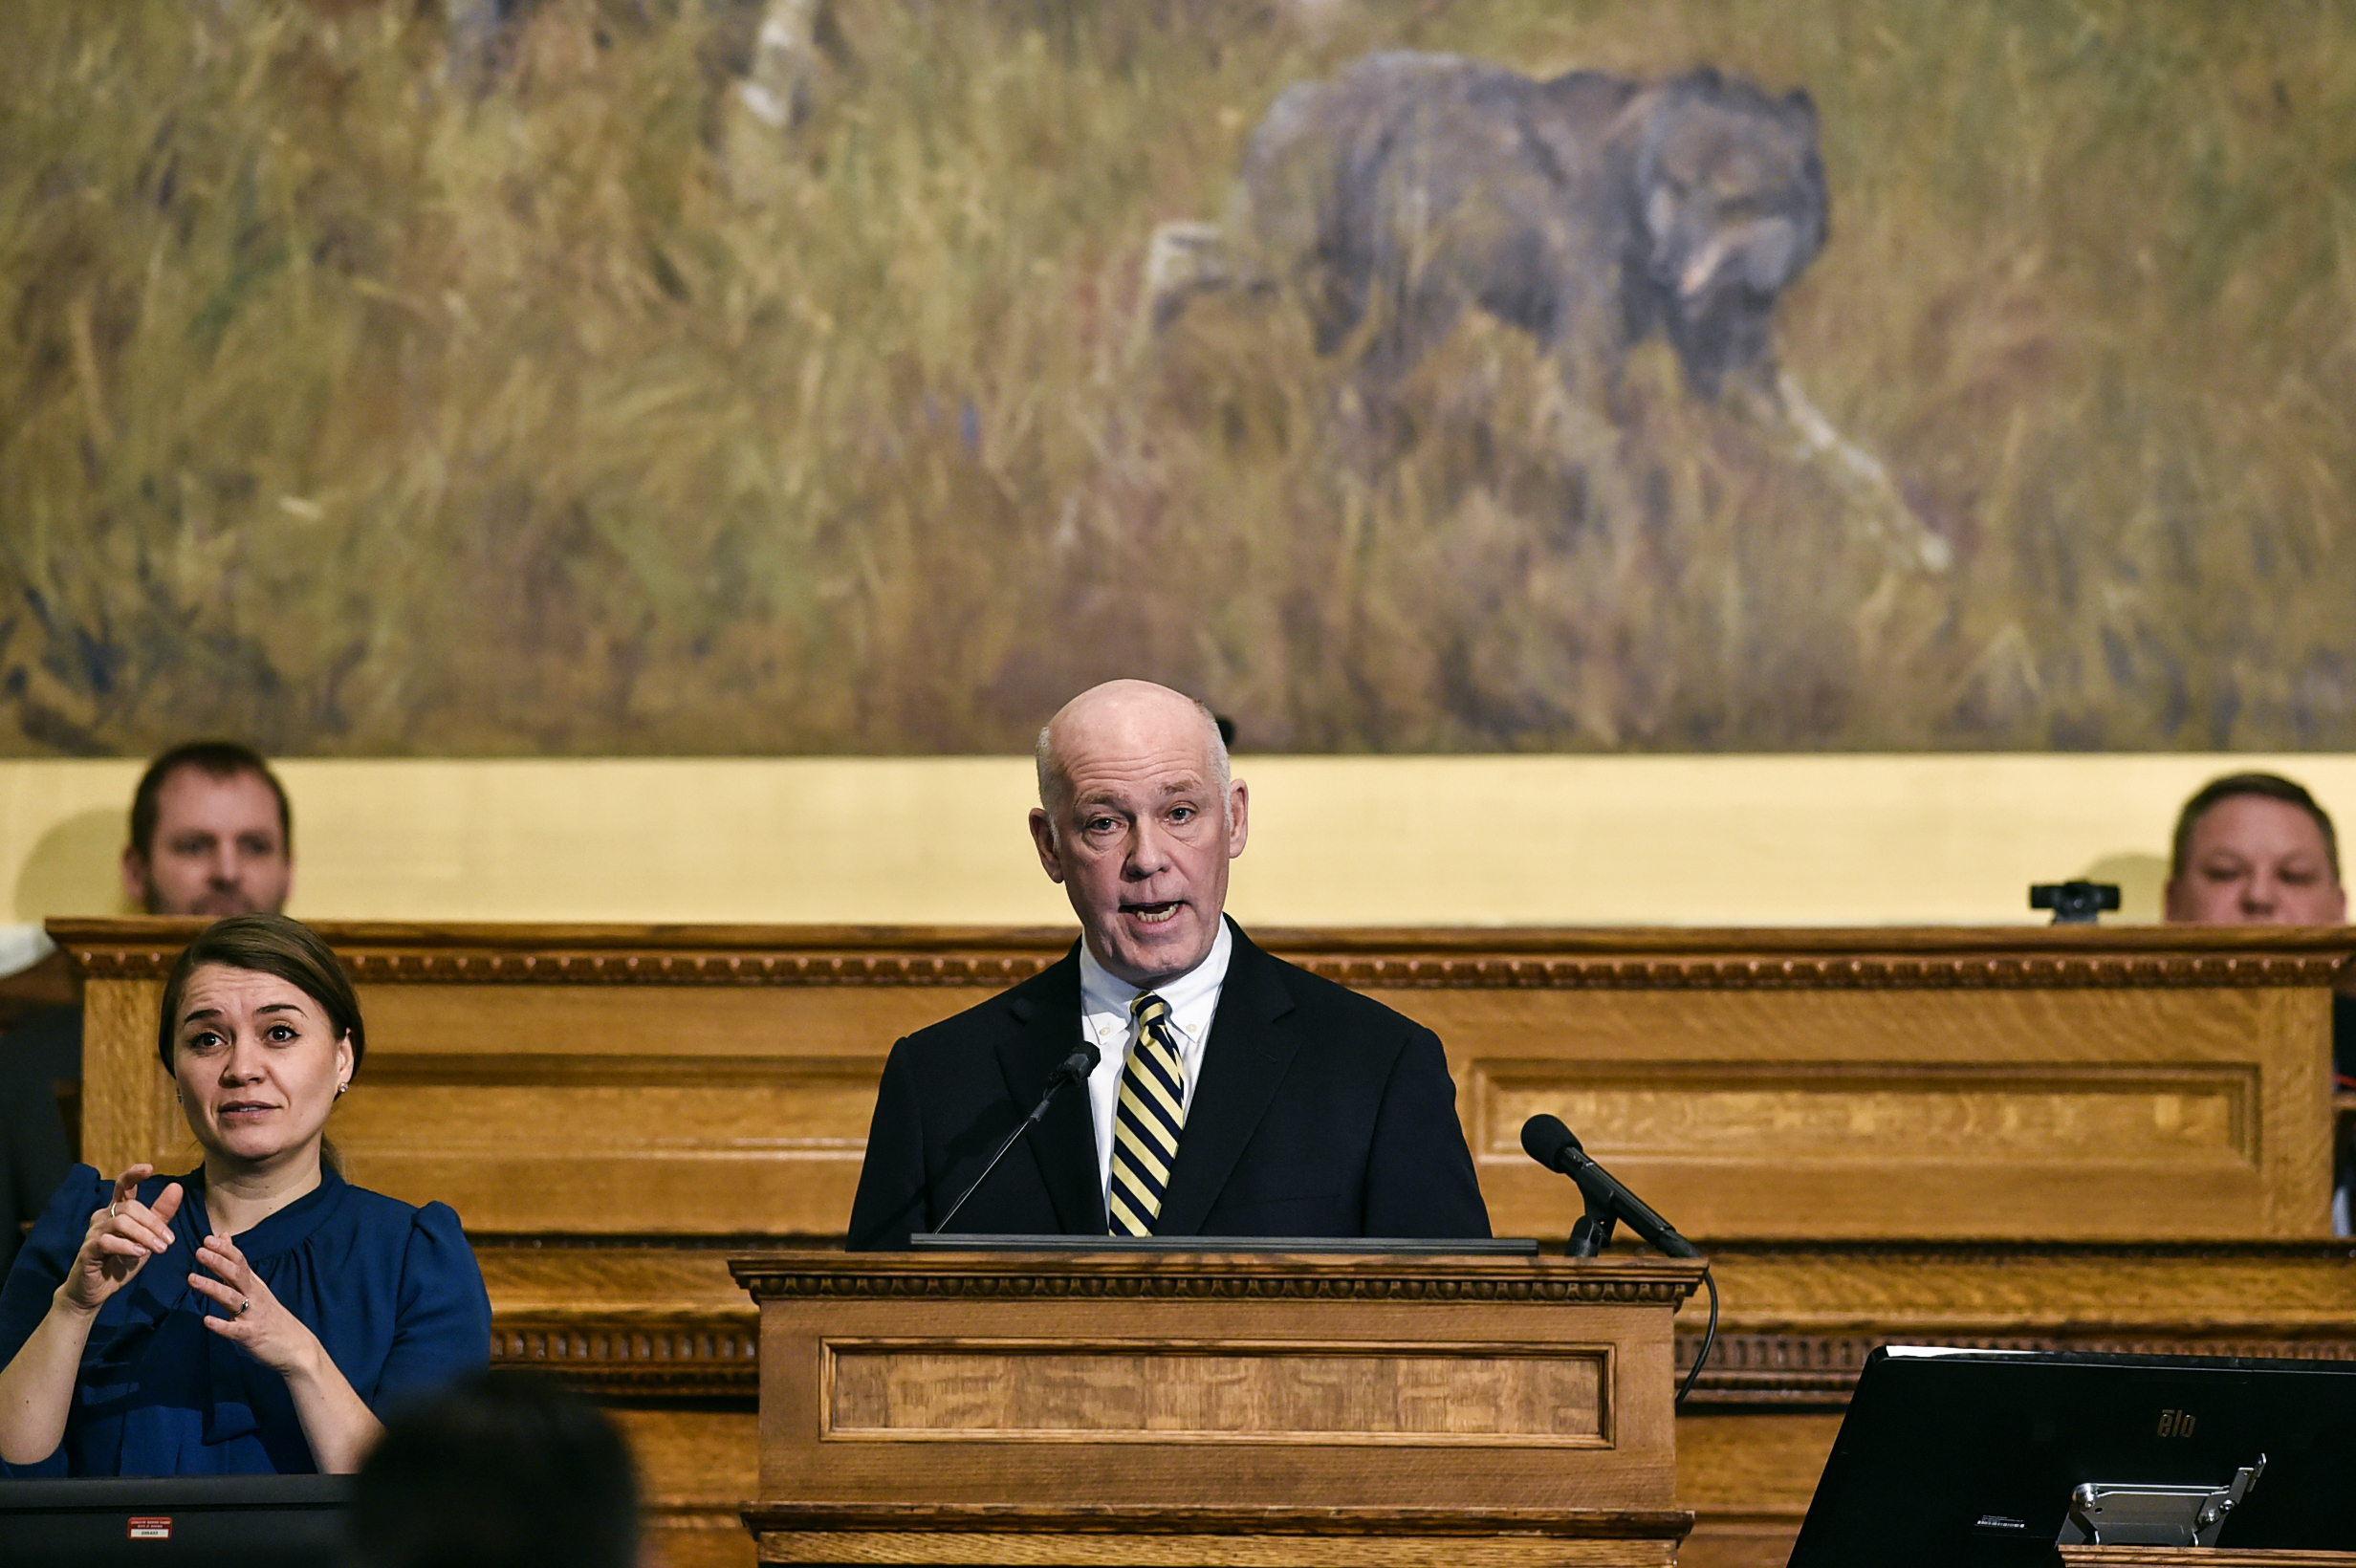 Gov. Greg Gianforte is standing at the podium of the Montana Senate/House of Reps building. He is wearing a black suit jacket, white shirt, and yellowish tie. An ASL interpreter is standing next to him.